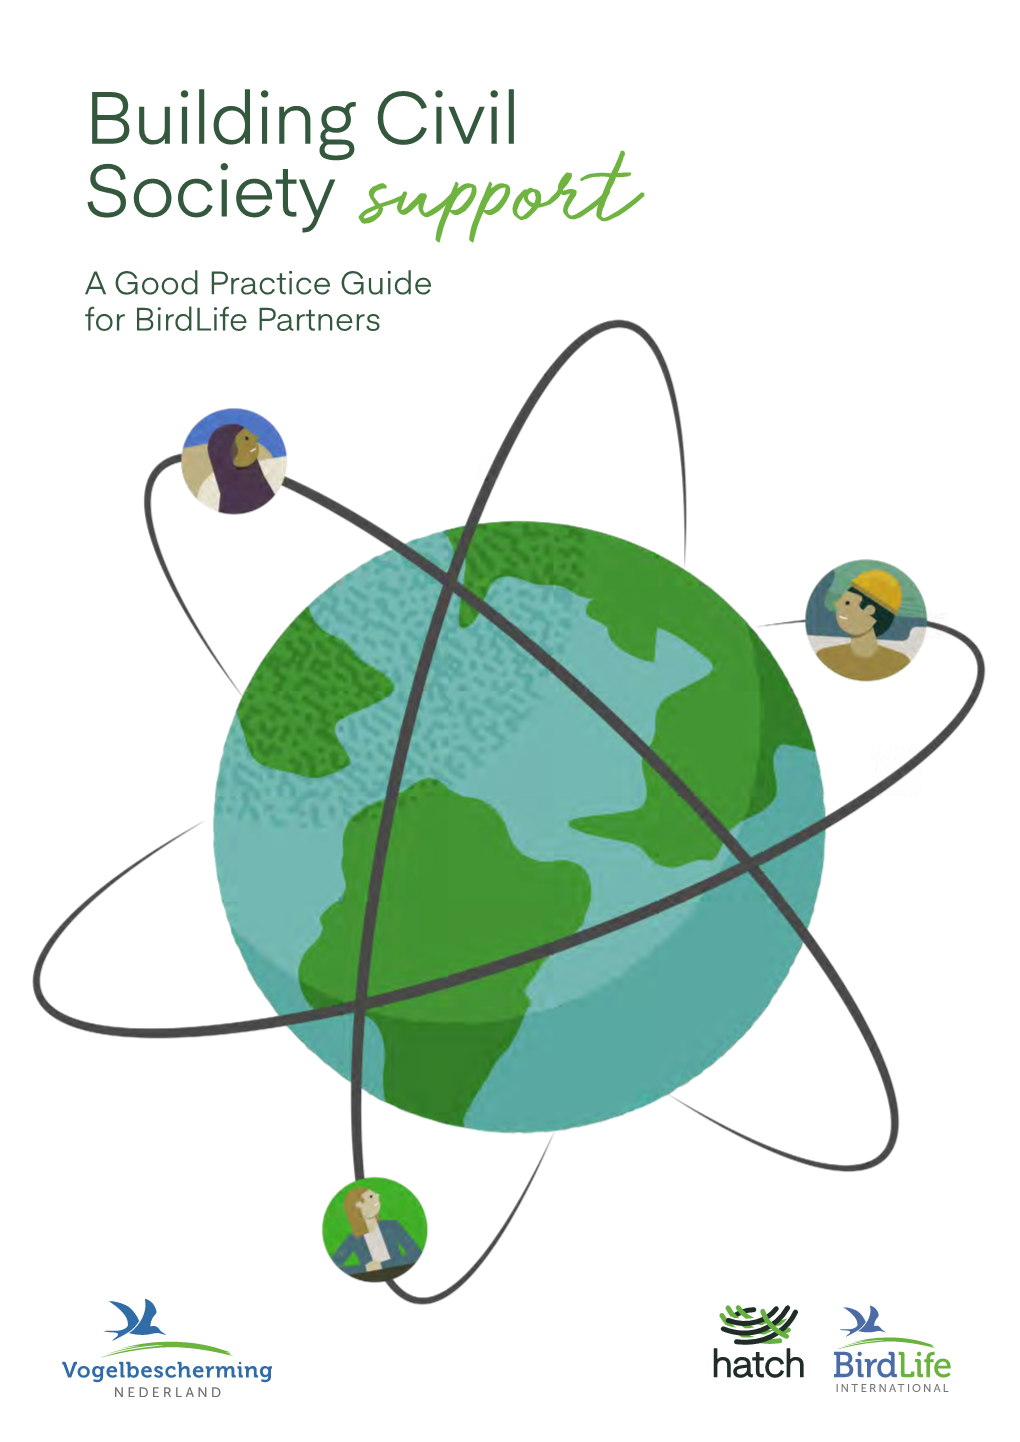 Building Civil Society Support a Good Practice Guide for Birdlife Partners